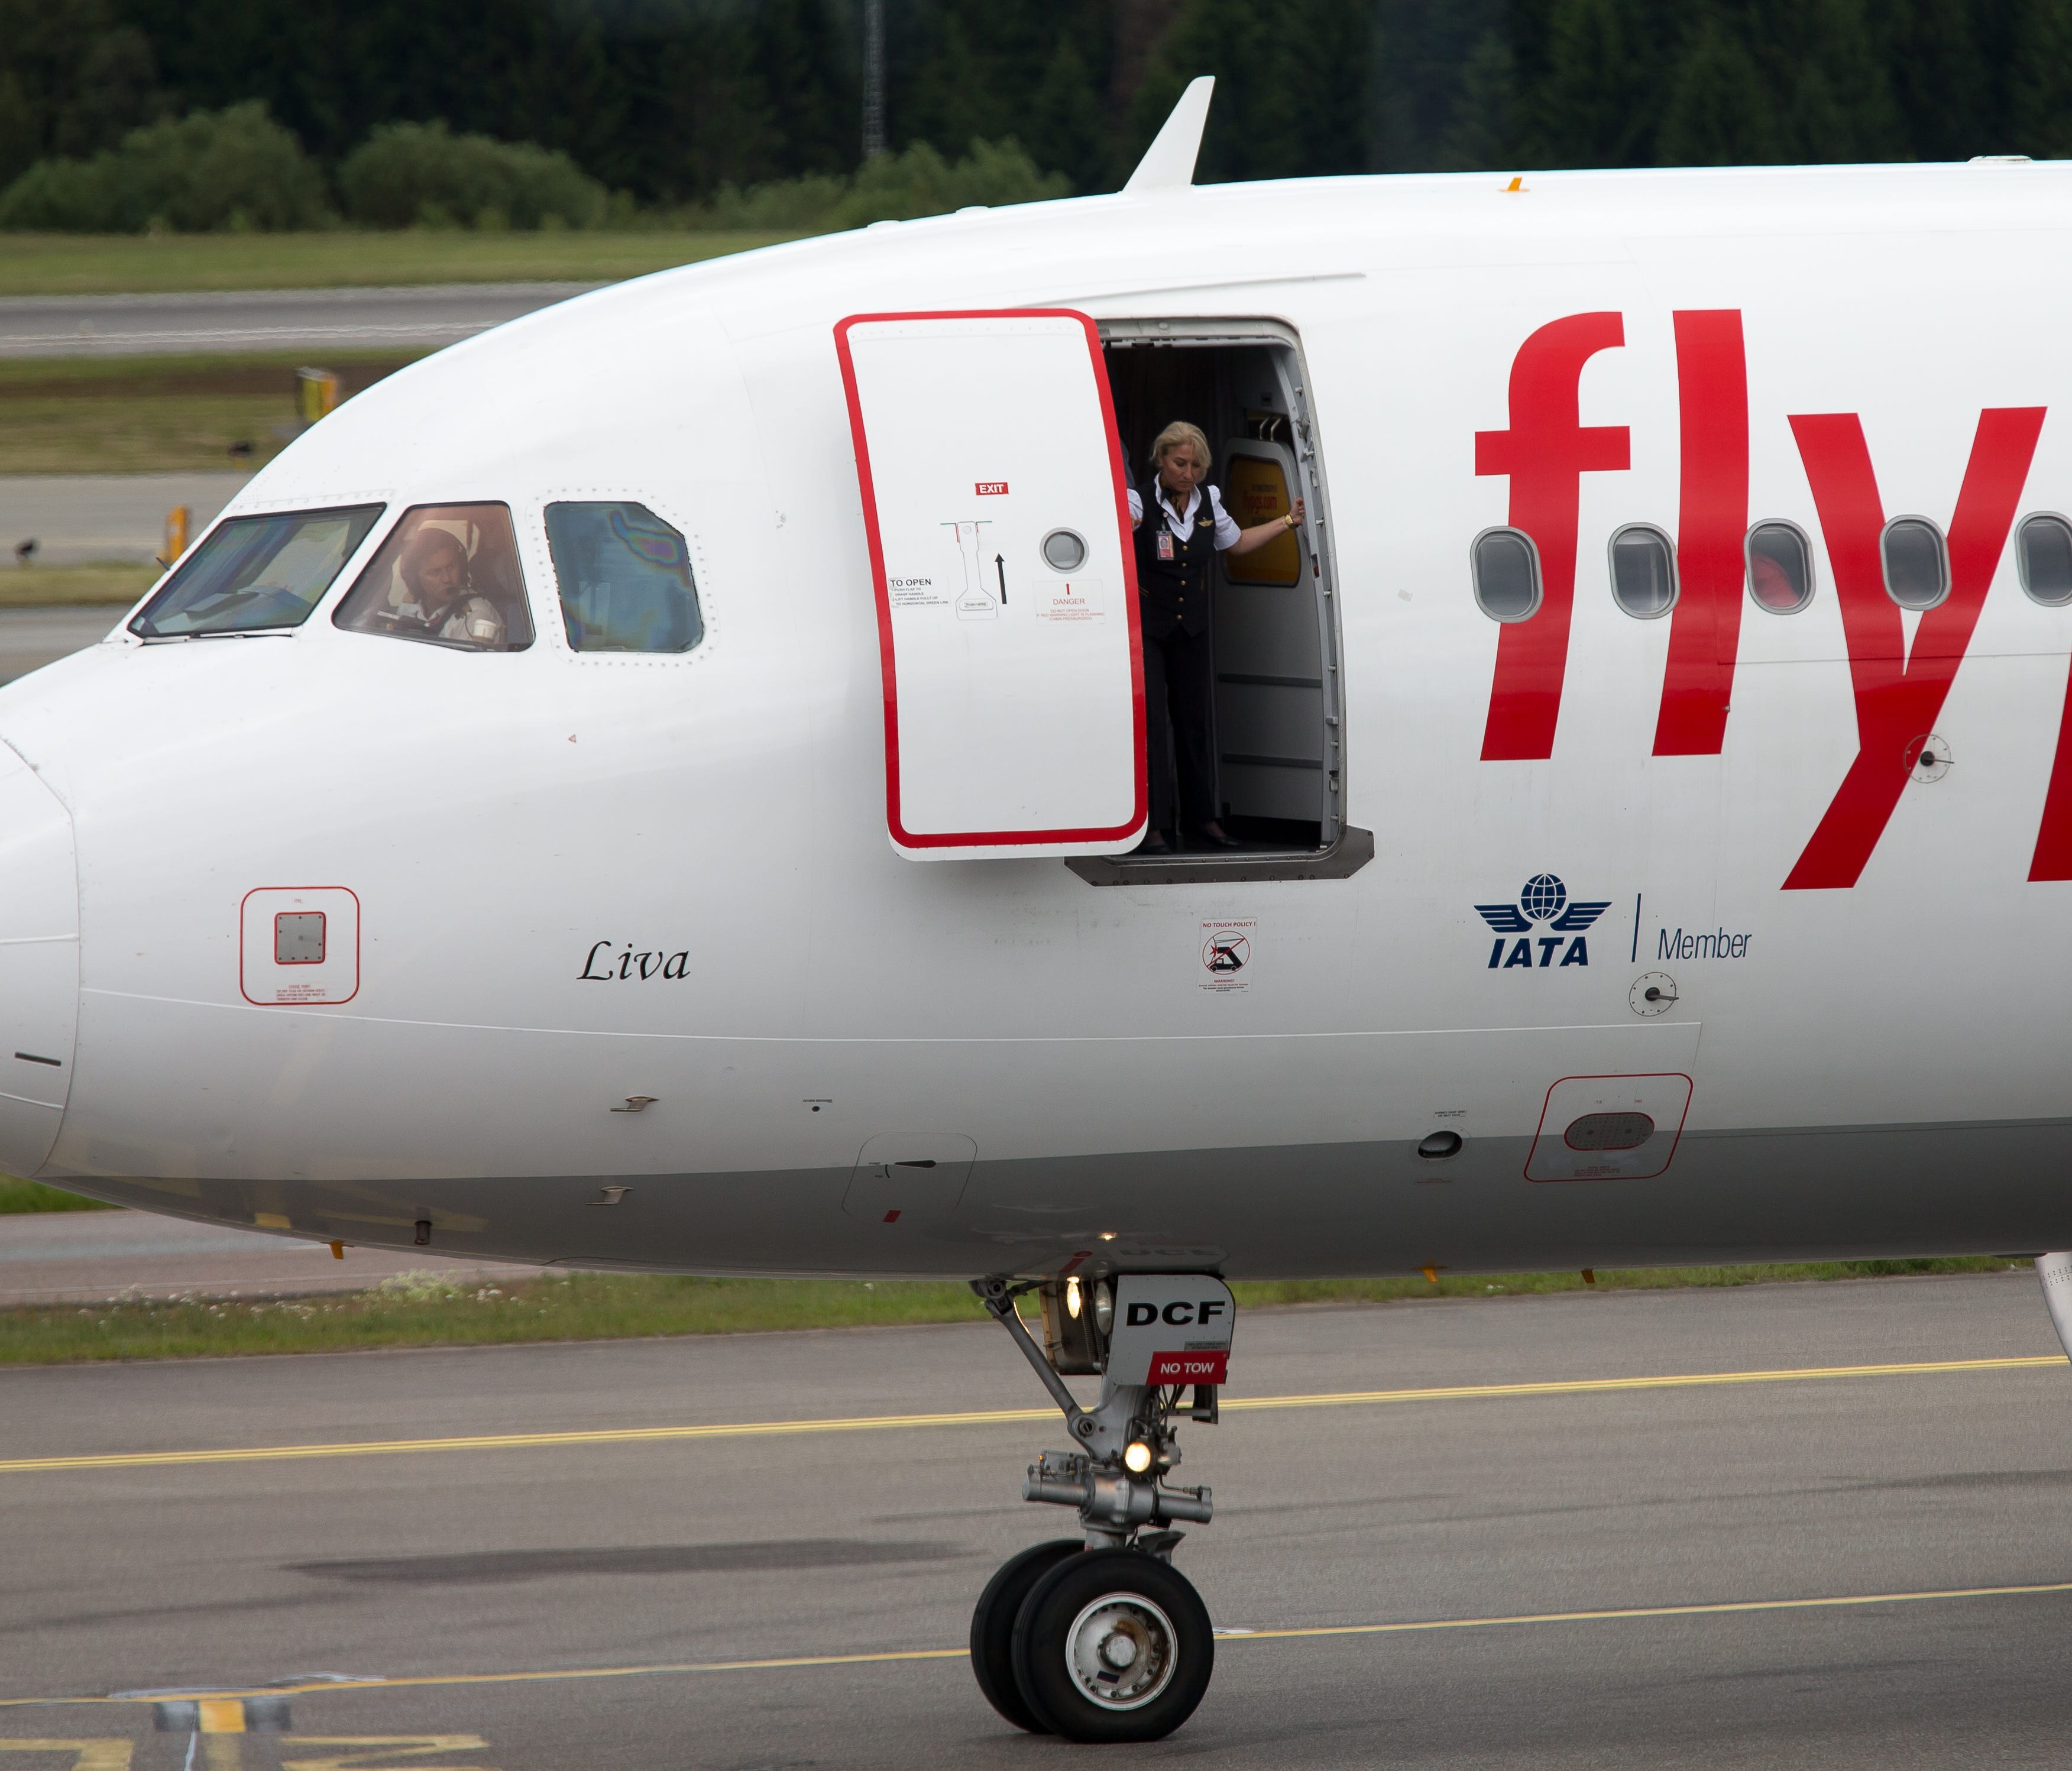 A flight attendant looks out an open door on a Pegasus Air plane on the taxiway at Stockholm Arlanda Airport on July 1, 2017.